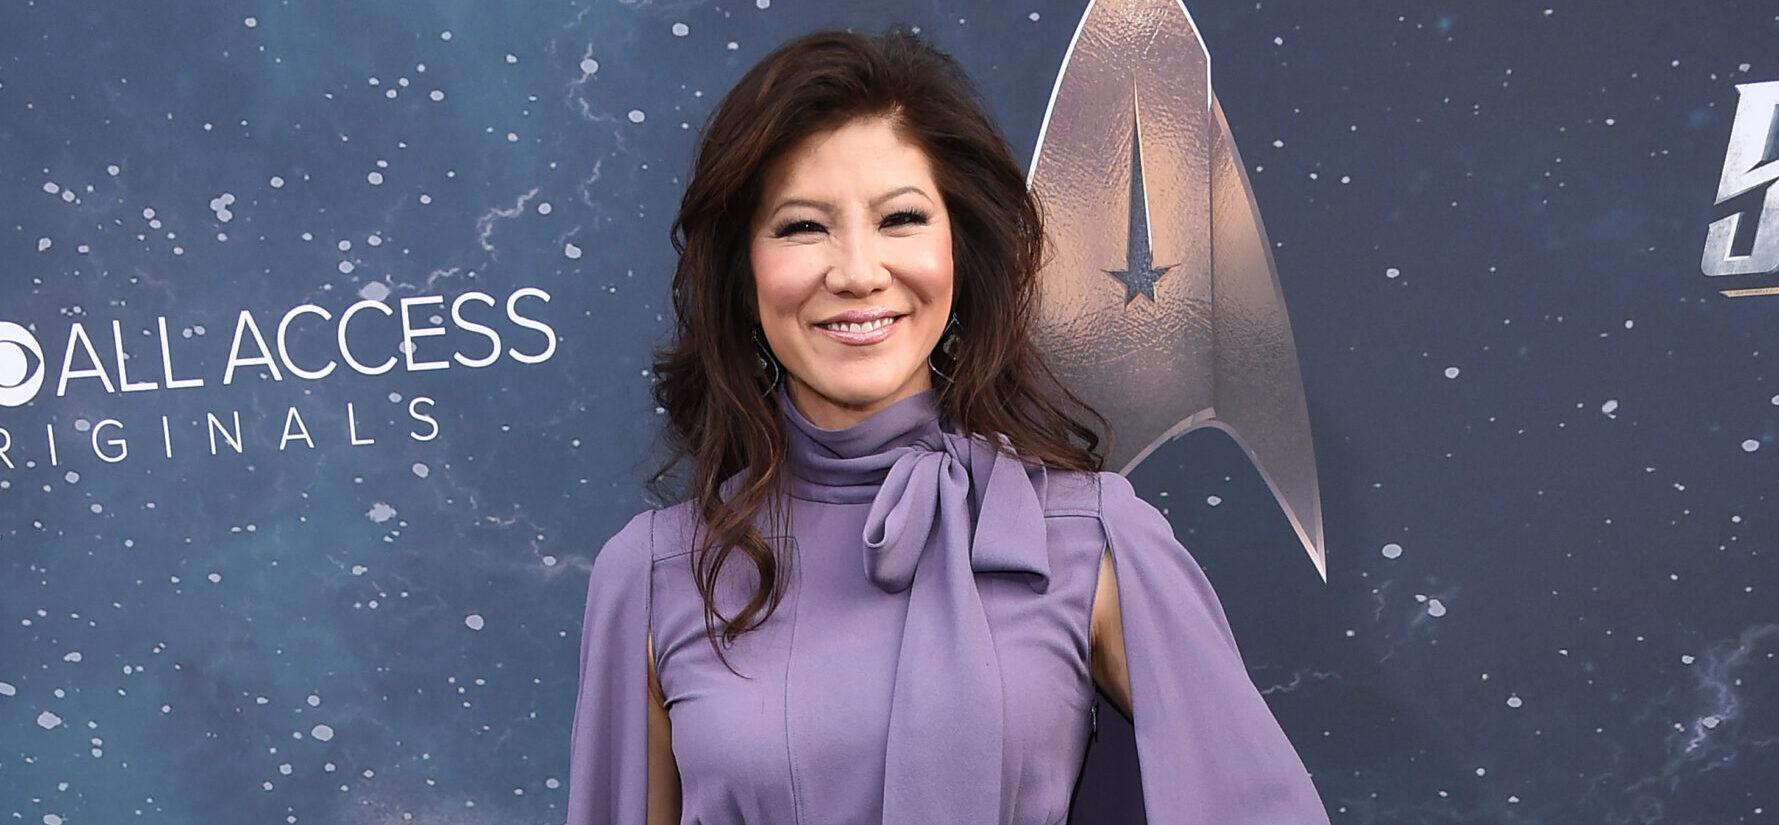 Julie Chen Breaks Silence On Orchestration Behind Her Exit From ‘The Talk’